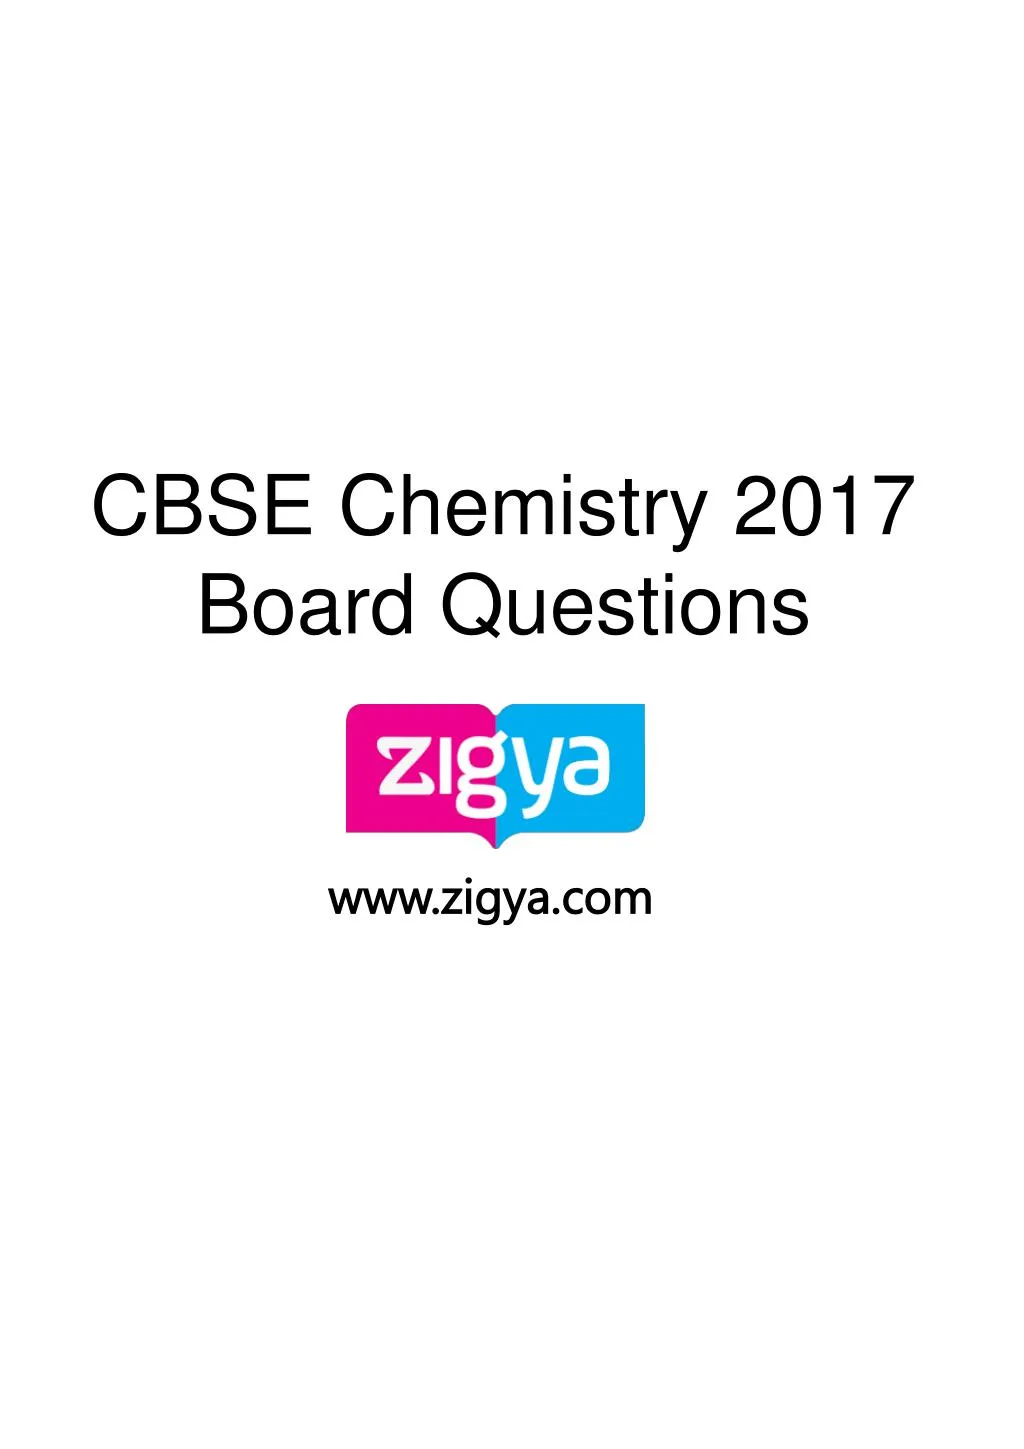 cbse chemistry 2017 board questions